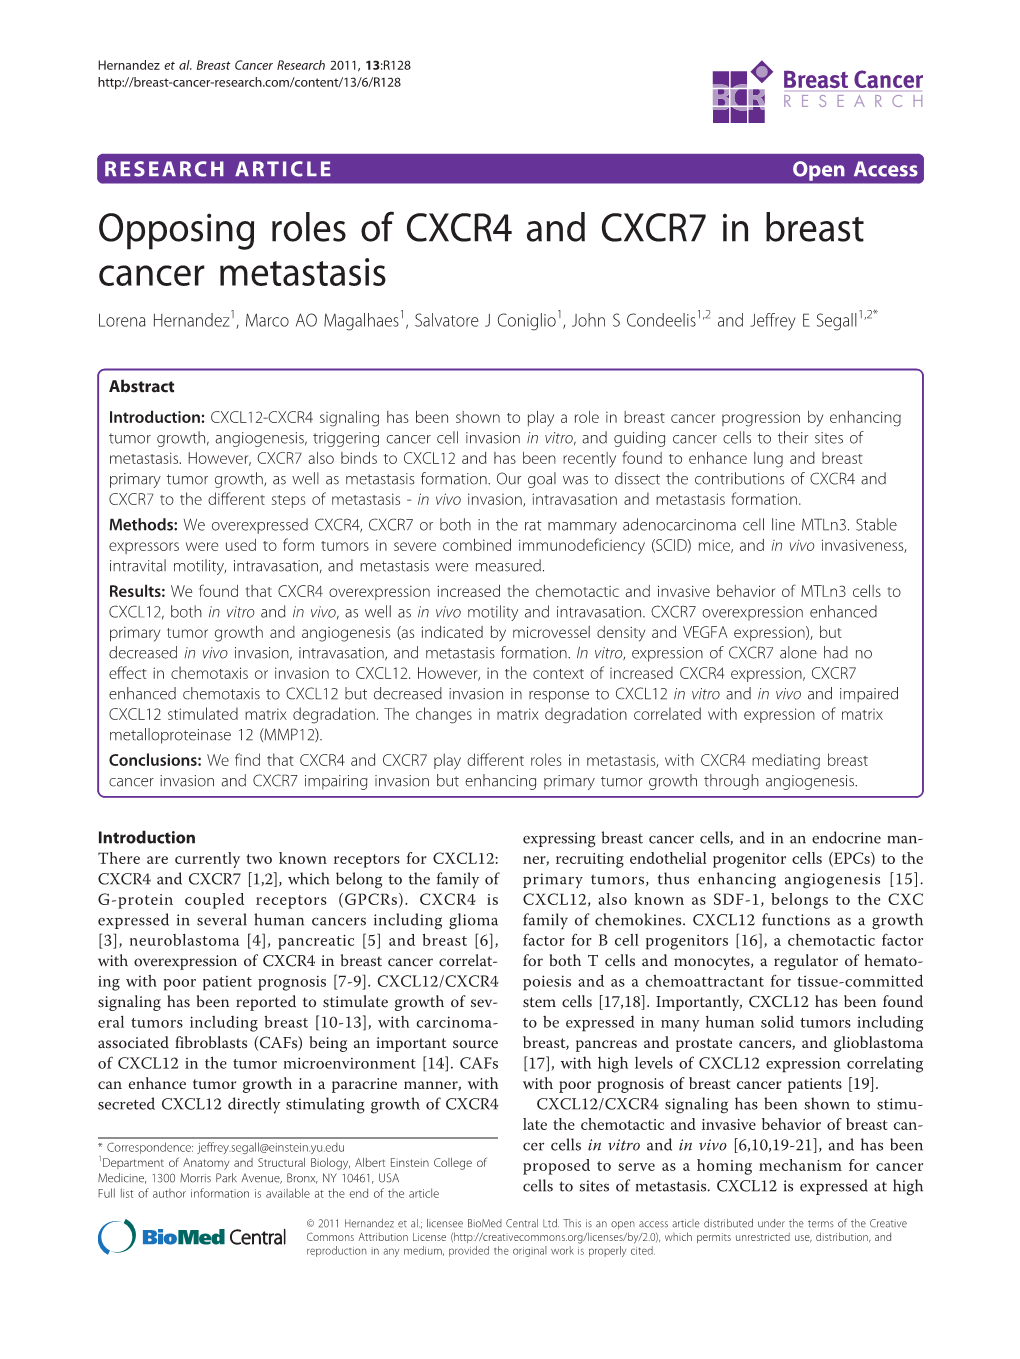 Opposing Roles of CXCR4 and CXCR7 in Breast Cancer Metastasis